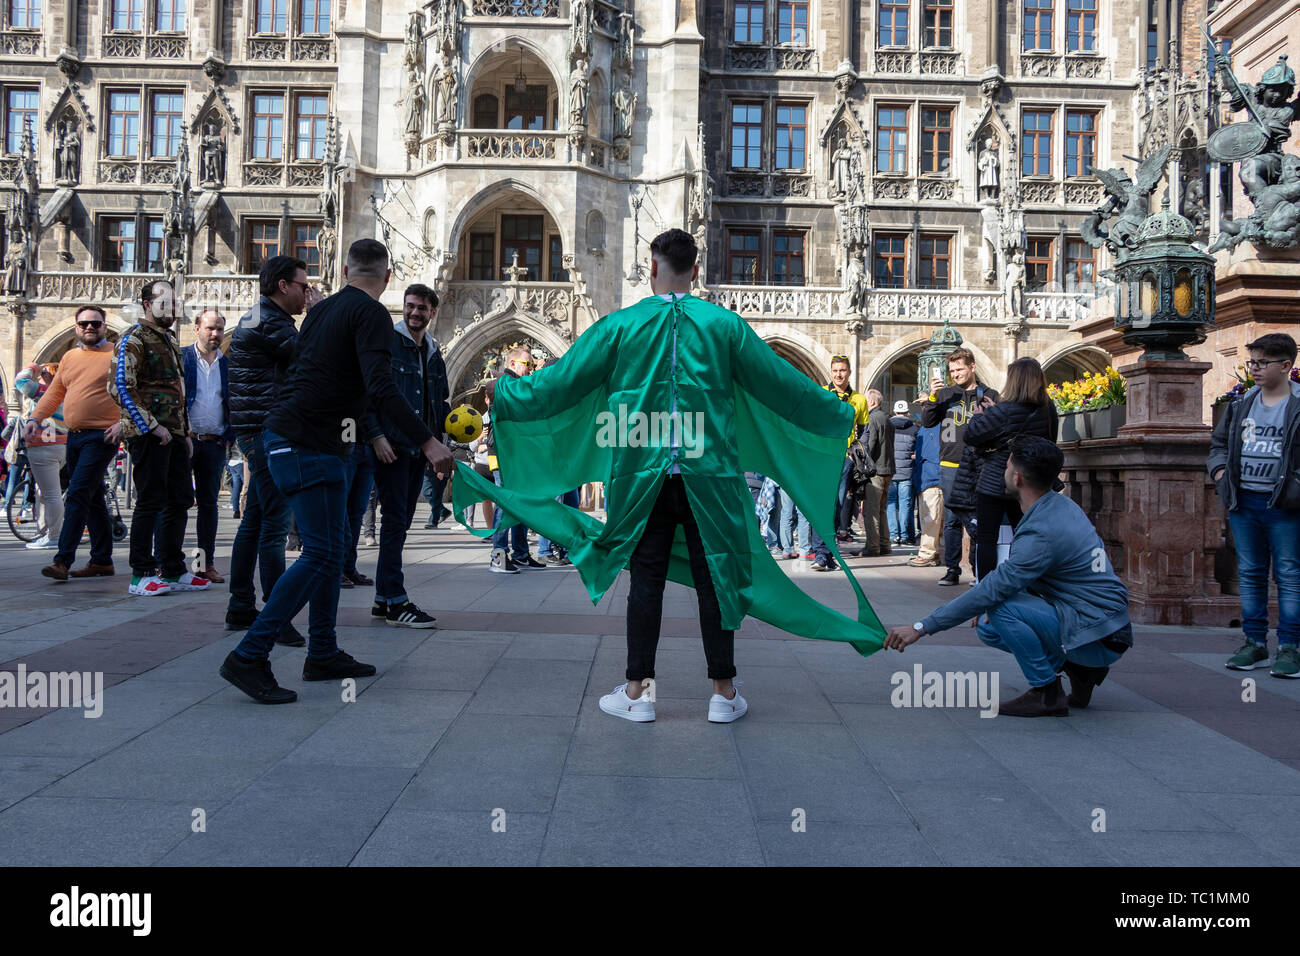 STACHUS, MUENCHEN, APRIL 6, 2019: bvb fans are shooting a ball on a man with a soccer goal shirt Stock Photo